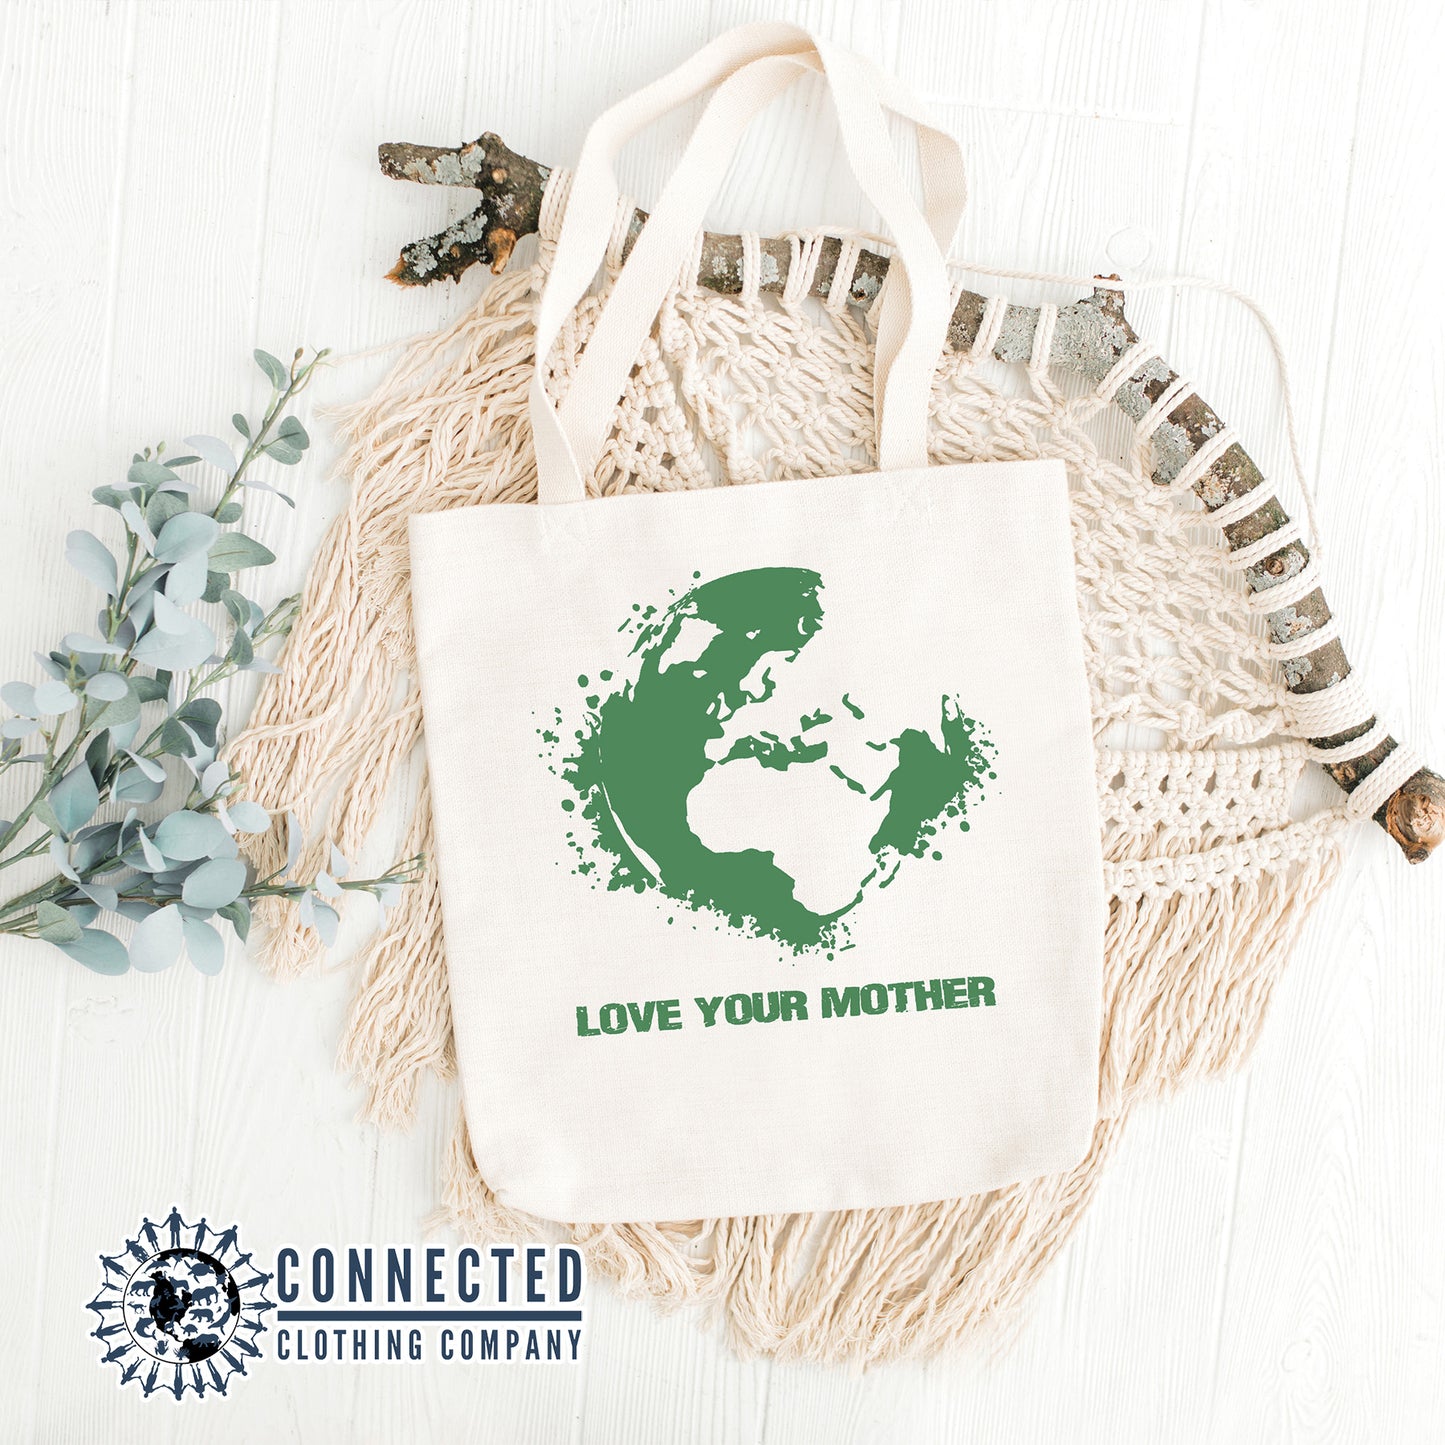 Love Your Mother Earth Tote Bag - Connected Clothing Company - 10% of proceeds donated to ocean conservation